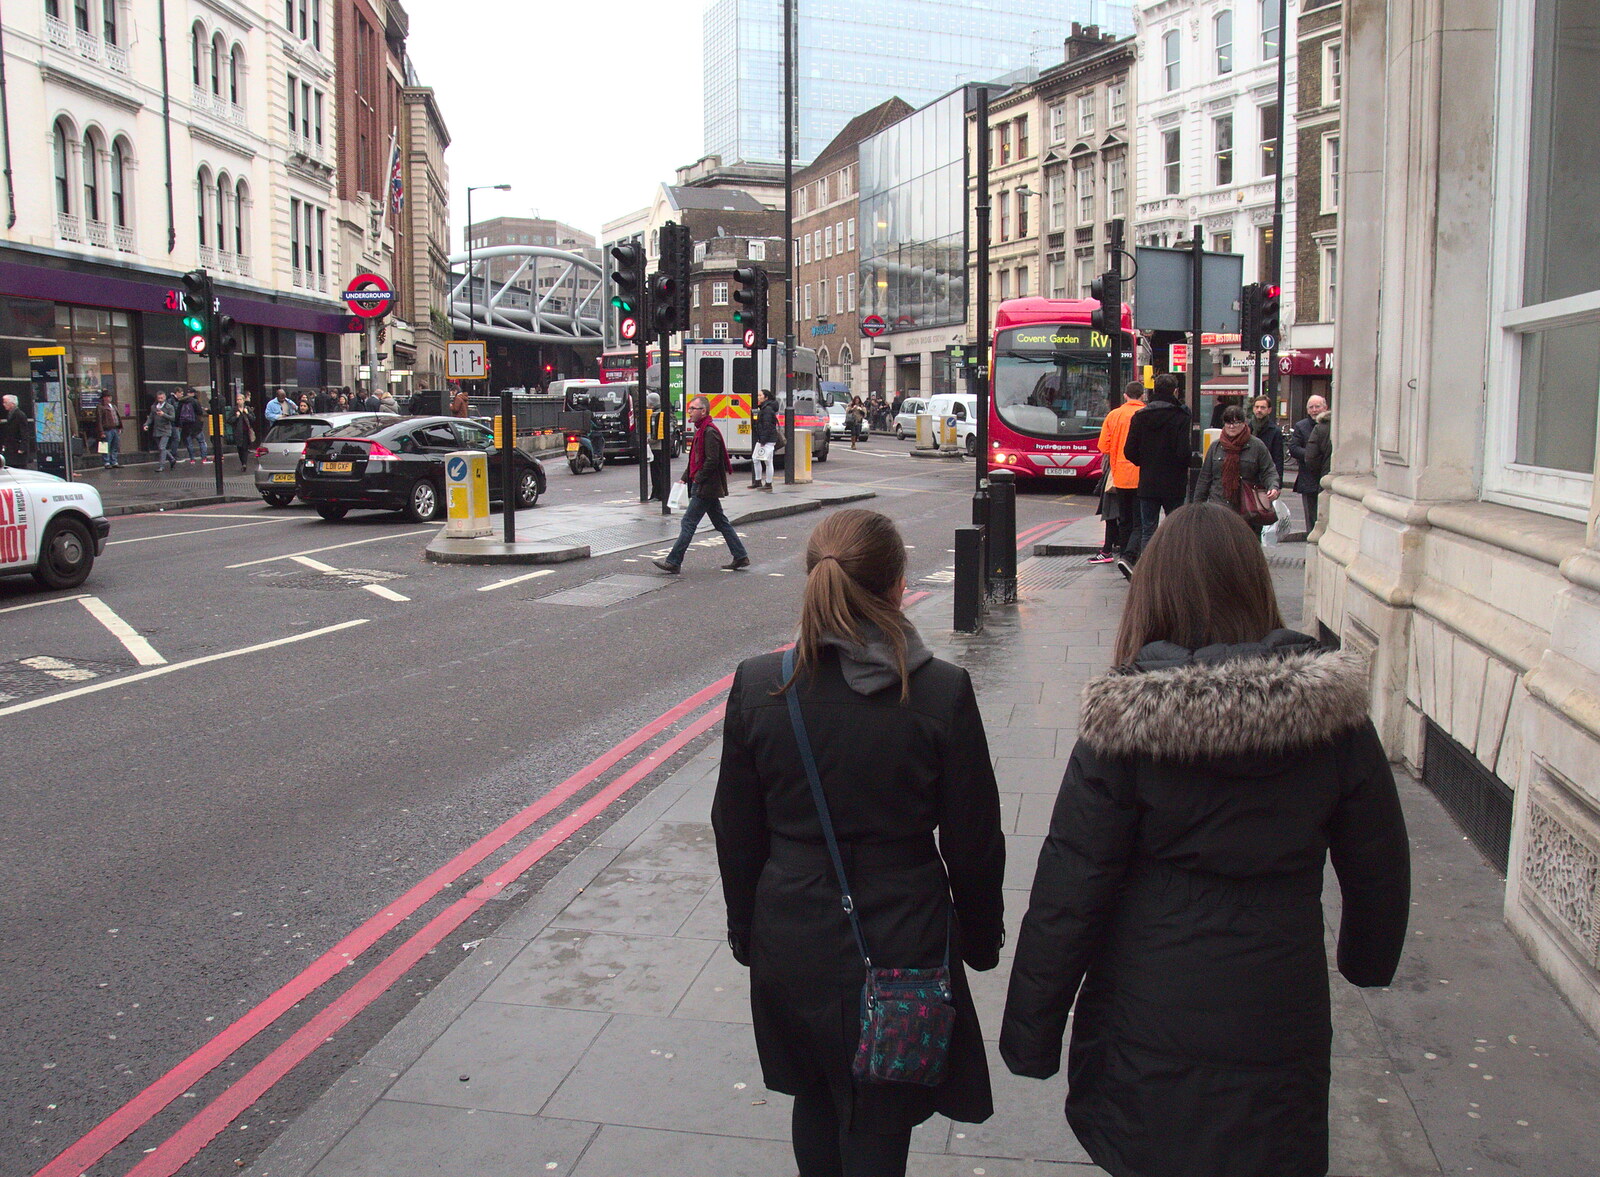 Southwark Street as it meets Borough High Street from A London Lunch, Borough, Southwark - 15th December 2015